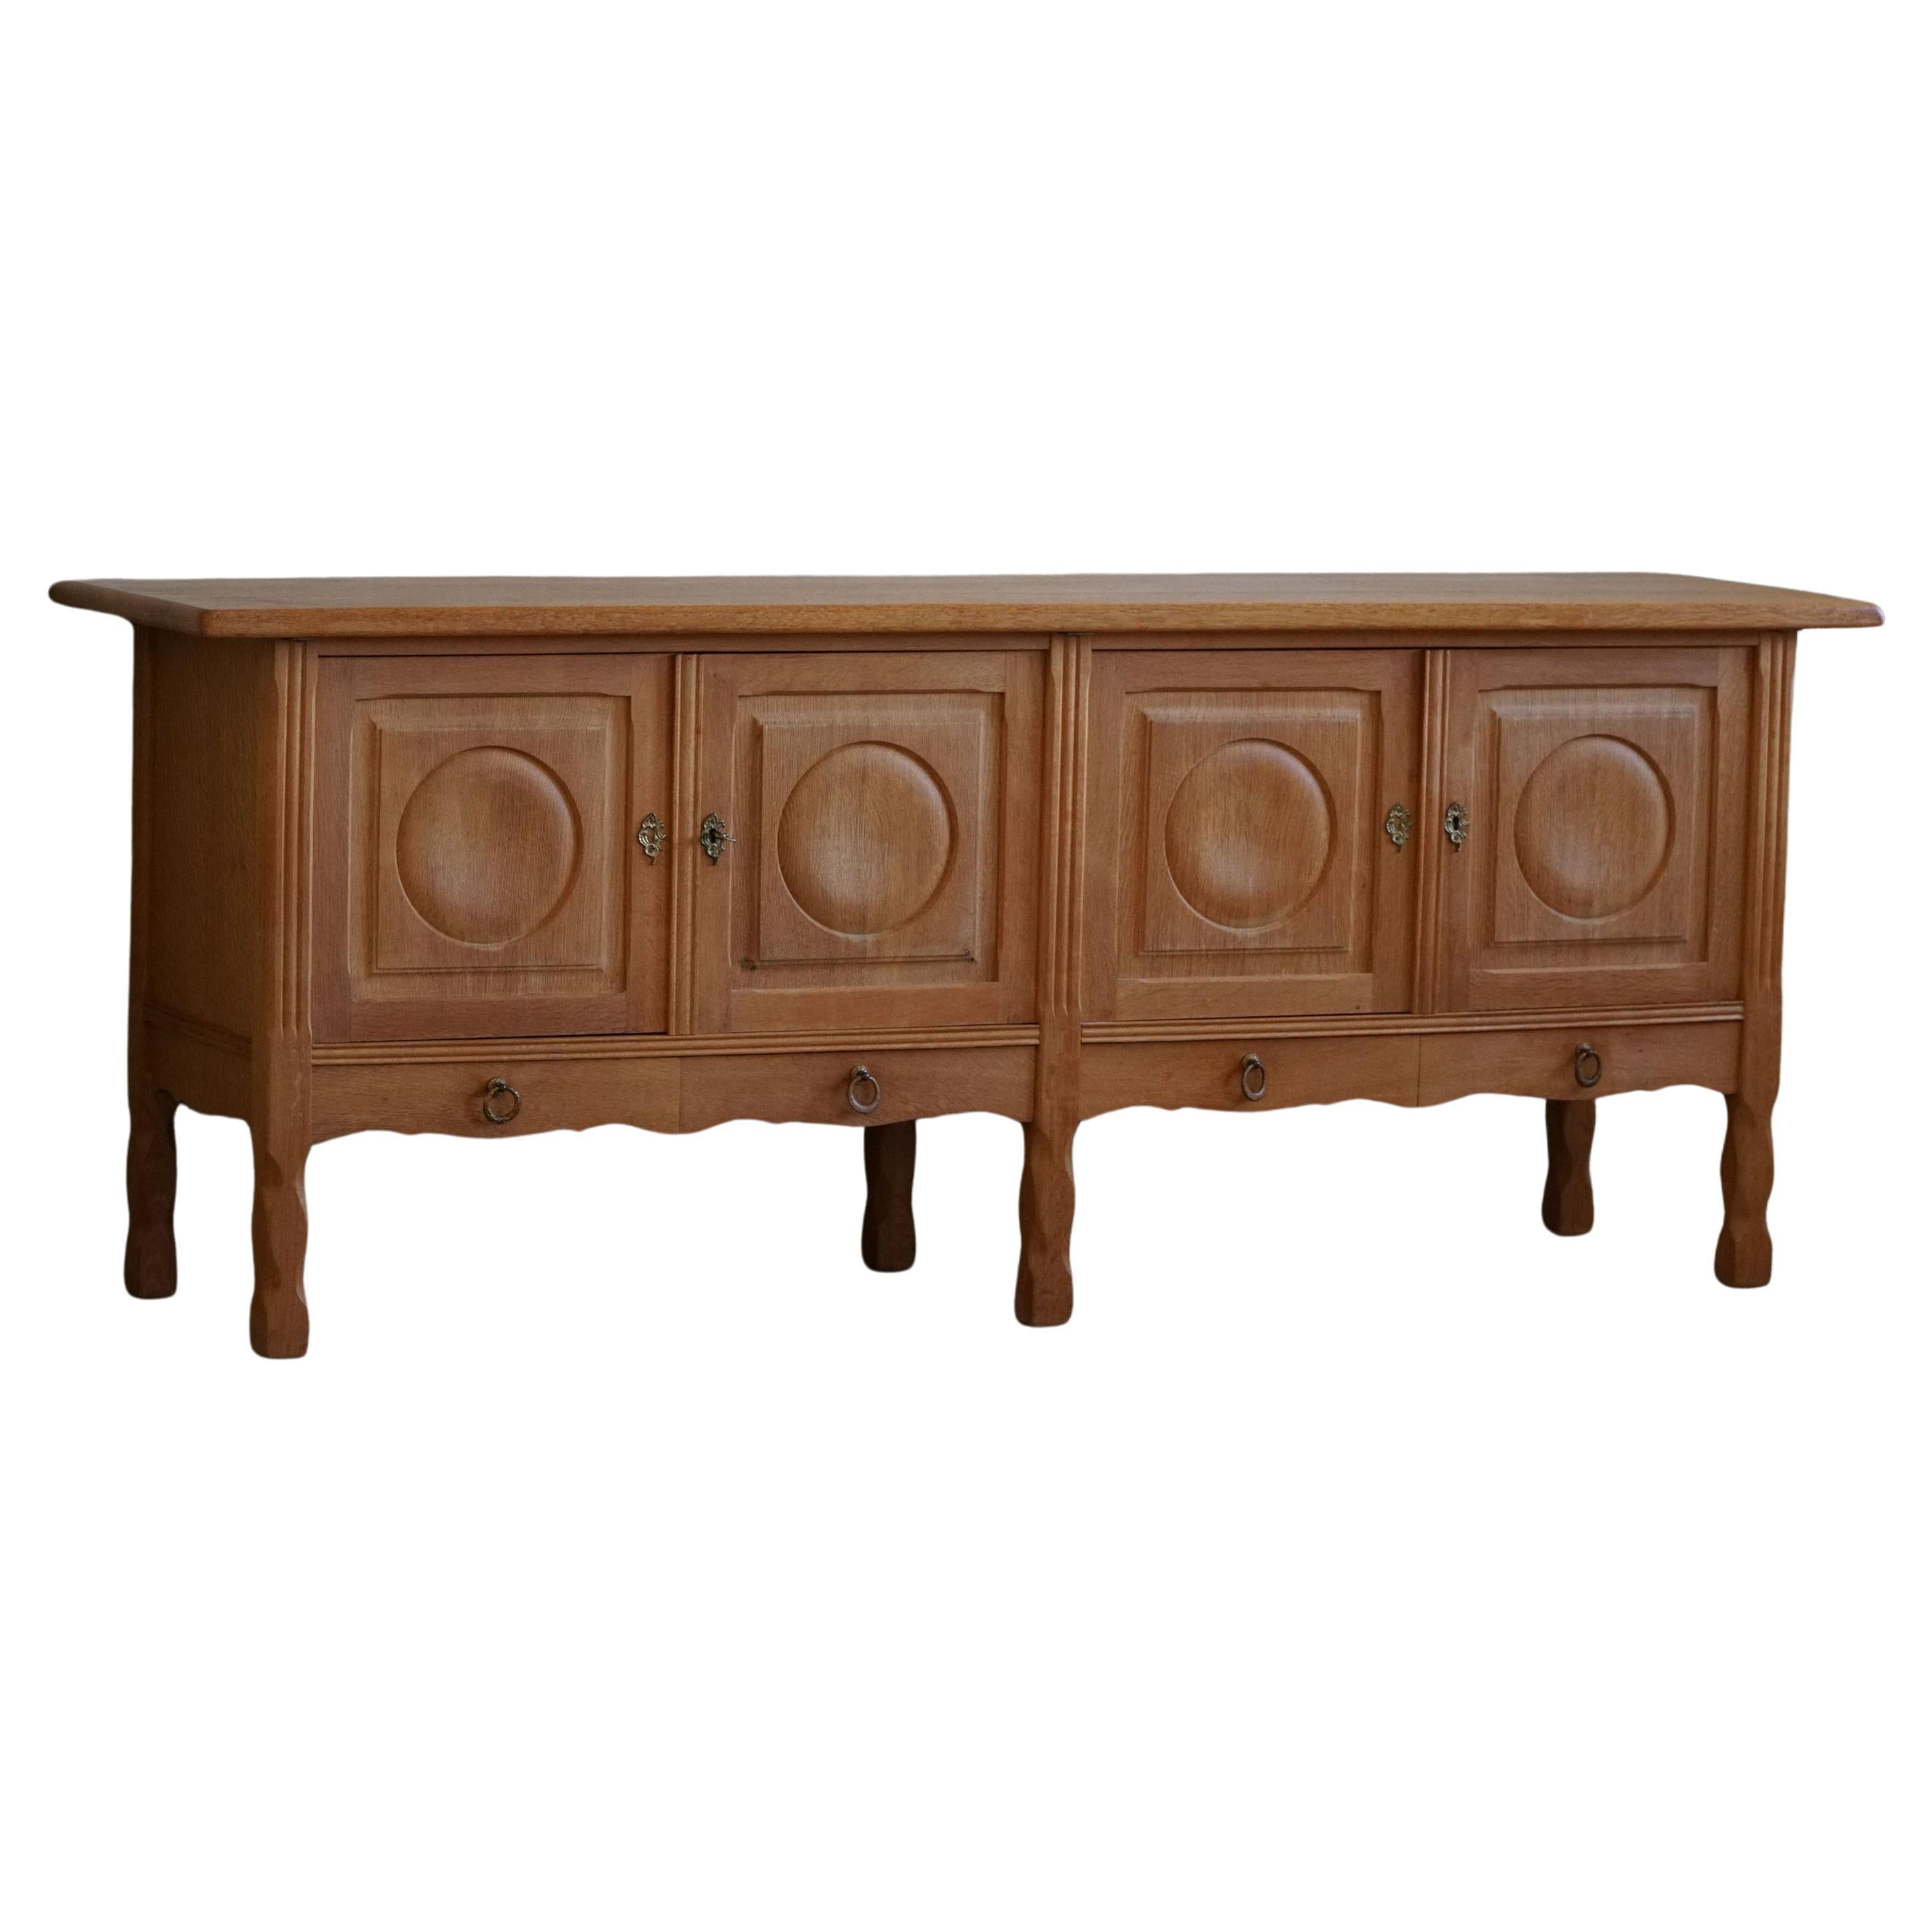 Sideboard in Oak, Mid Century, Made by a Danish Cabinetmaker, Brutalist, 1960s For Sale